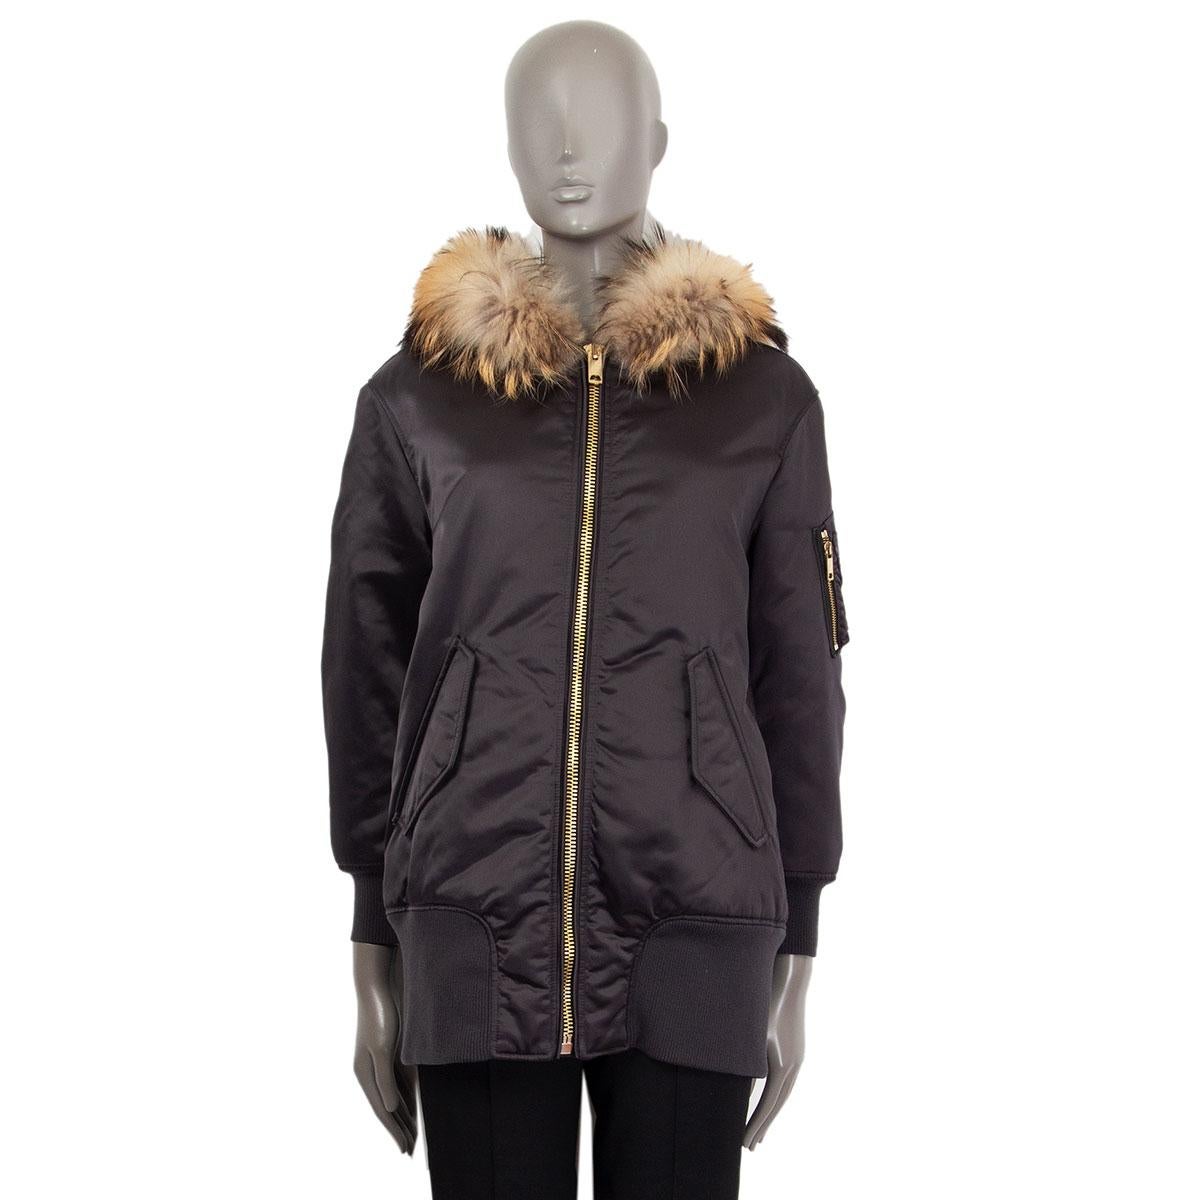 authentic Burberry bomber parka in charcoal polyamide (100%), hood fur trim in asiatic raccoon (100%), cuffs and hem in wool (86%) and polyamide (14%). Closes with a zipper on the front and has two flap pockets. Lined in acetate (70%) and cupro